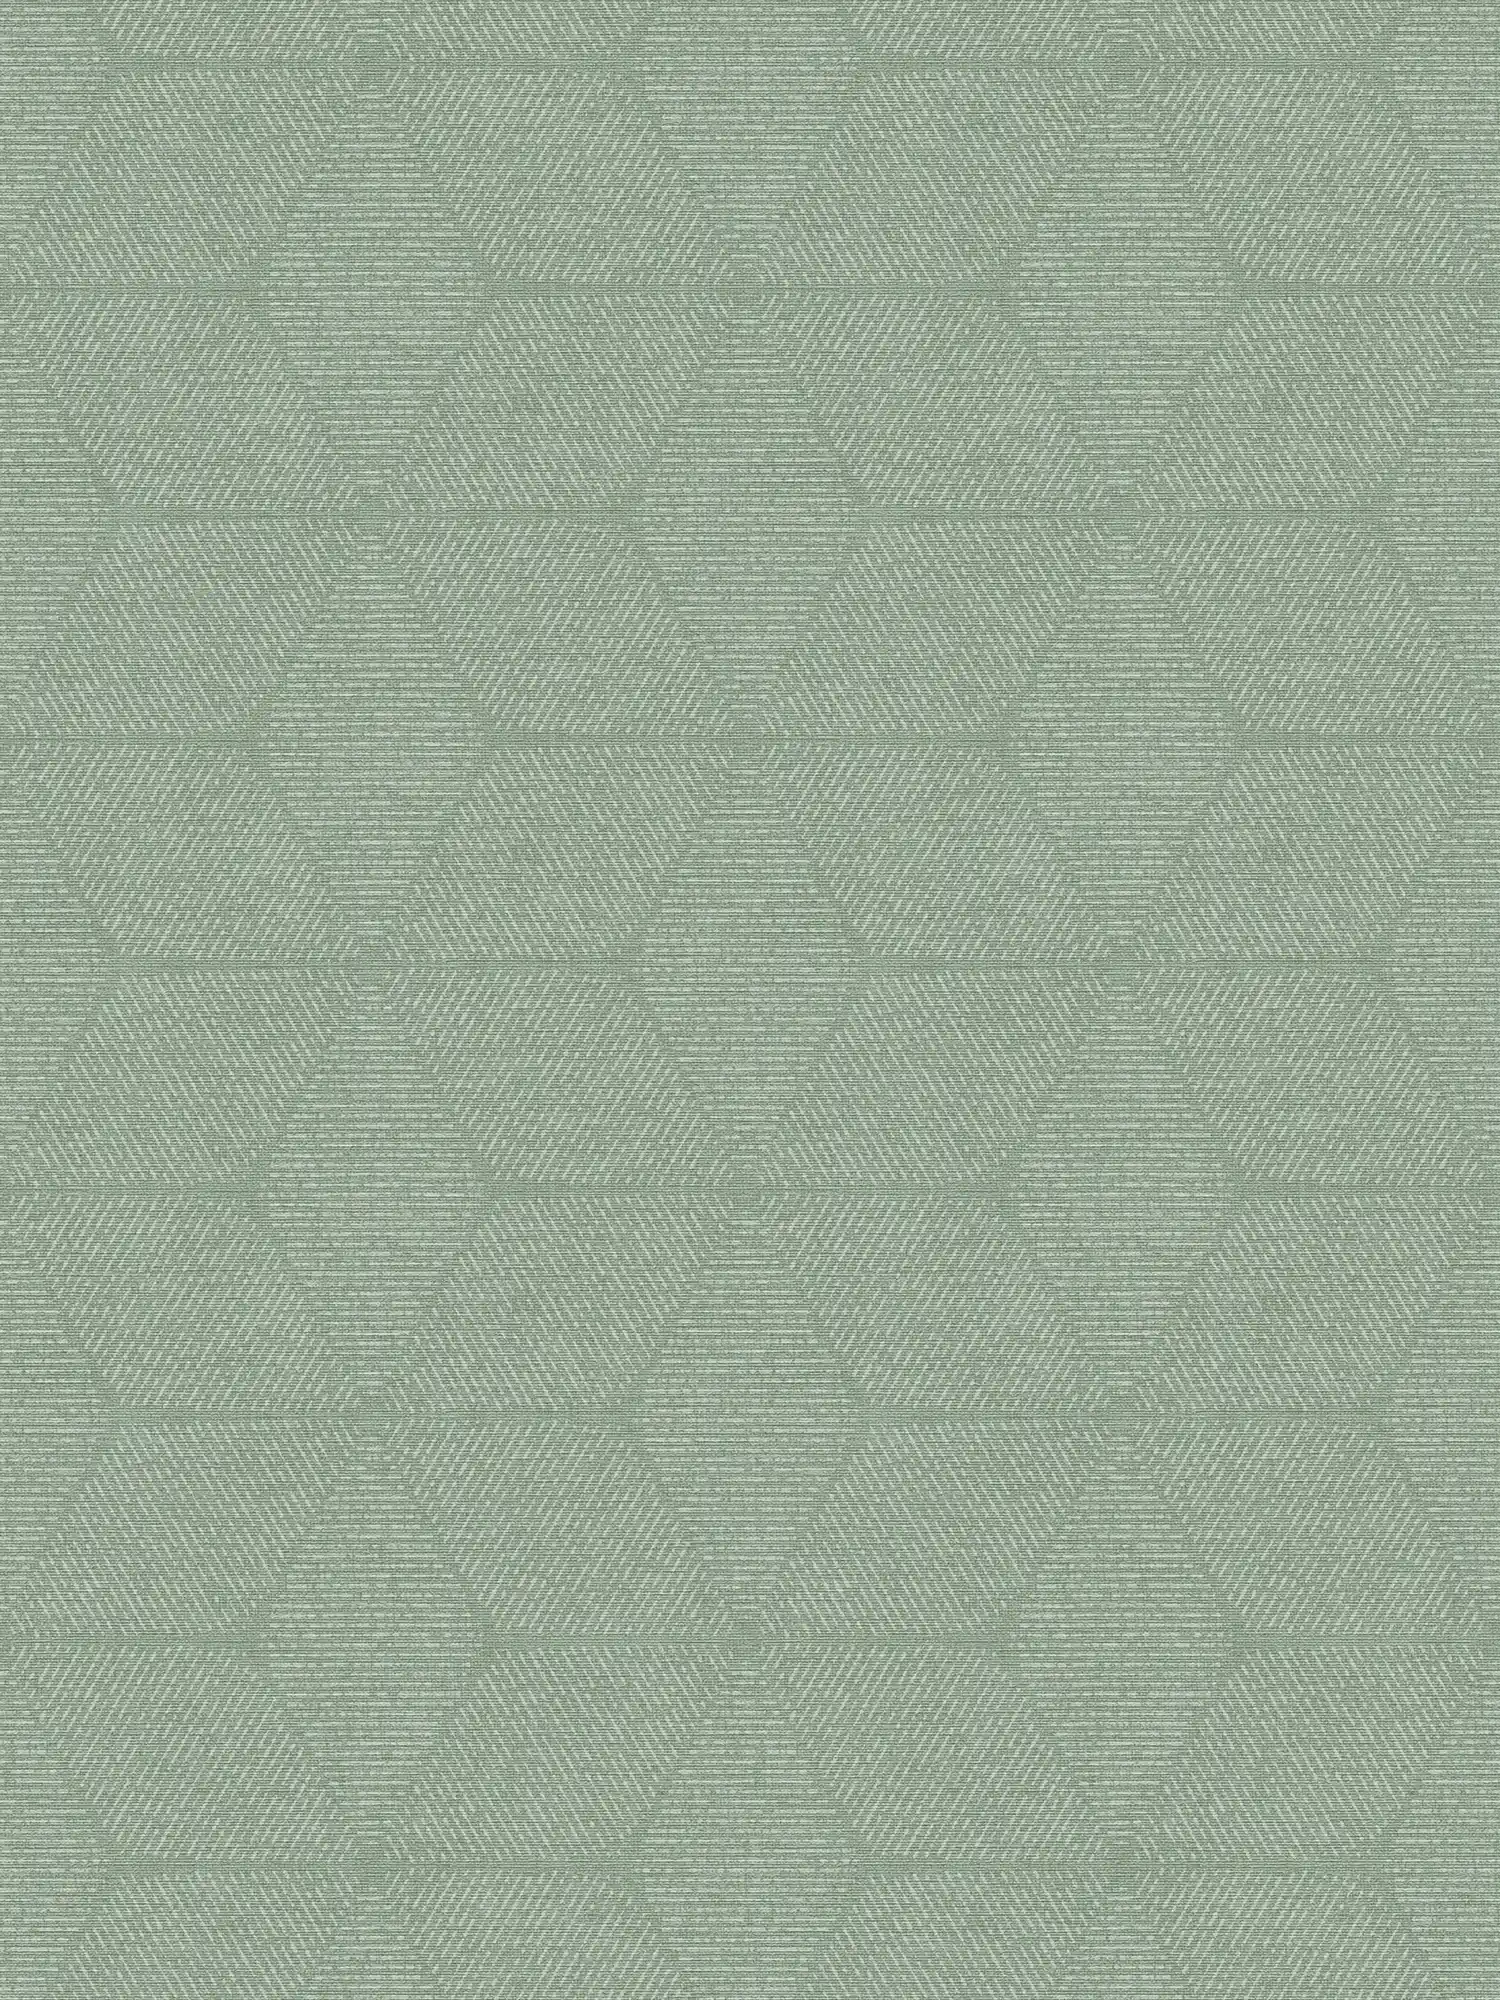 Non-woven wallpaper in floral pattern - green, white
